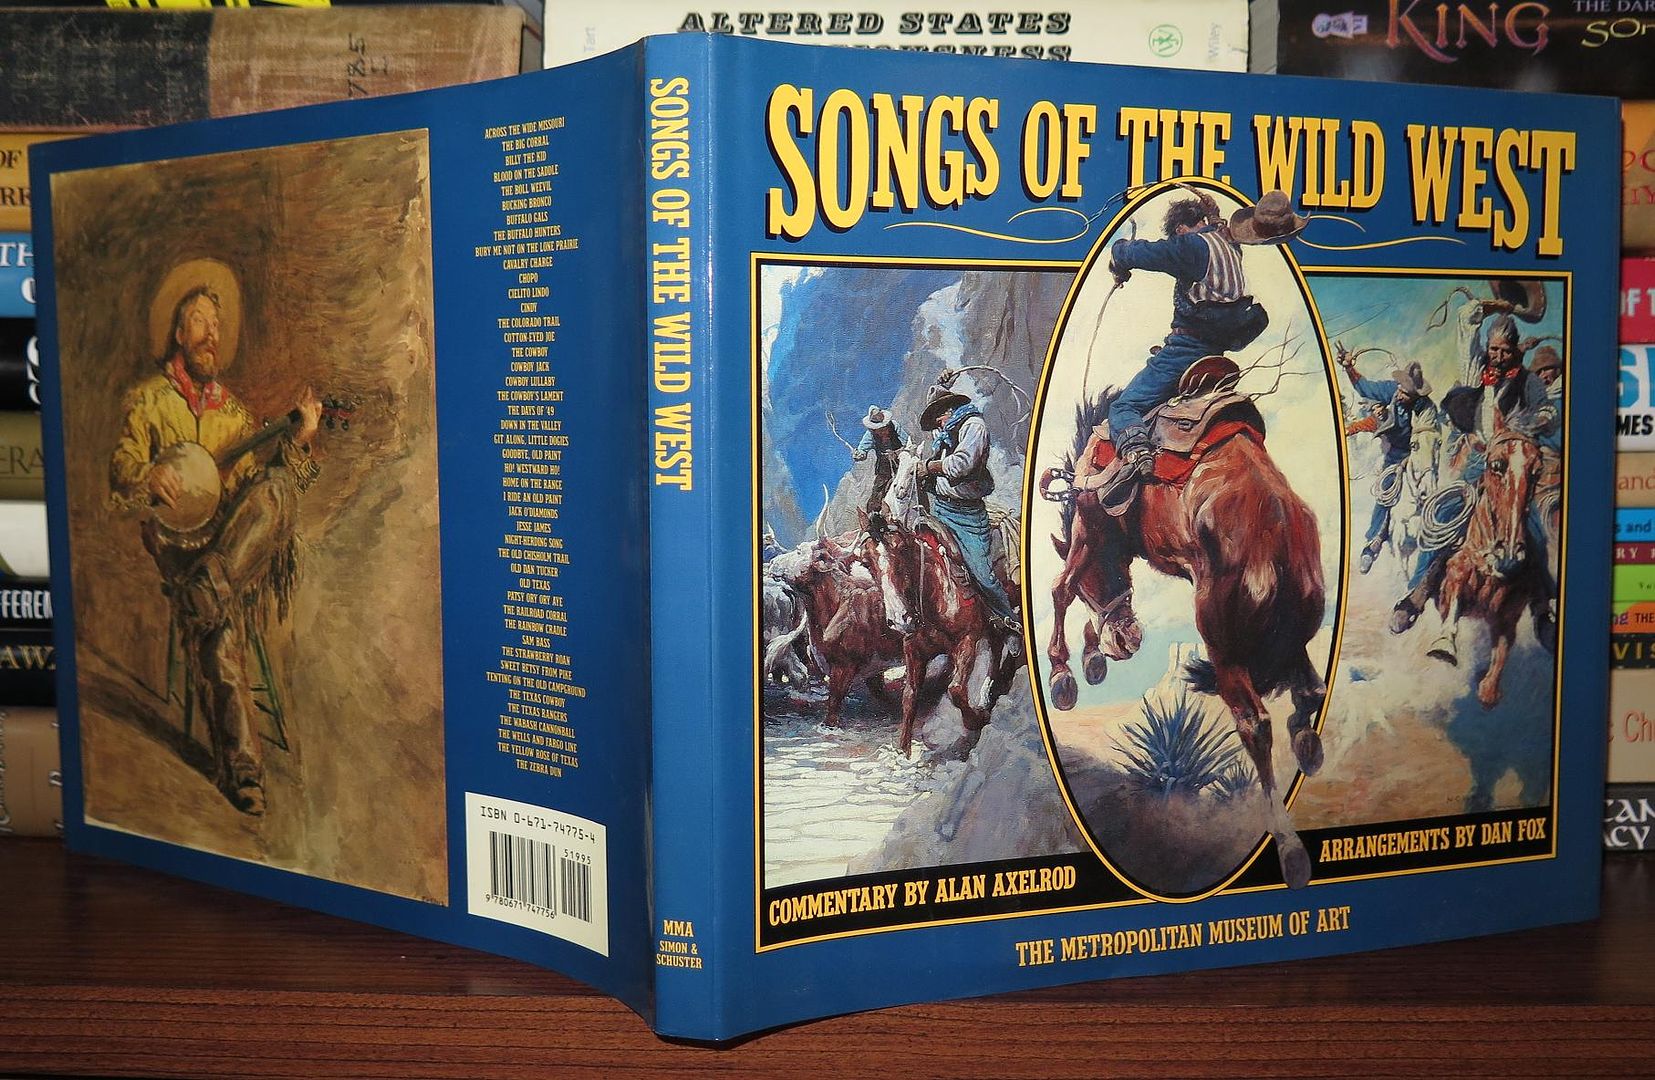 AXELROD, ALAN - Songs of the Wild West